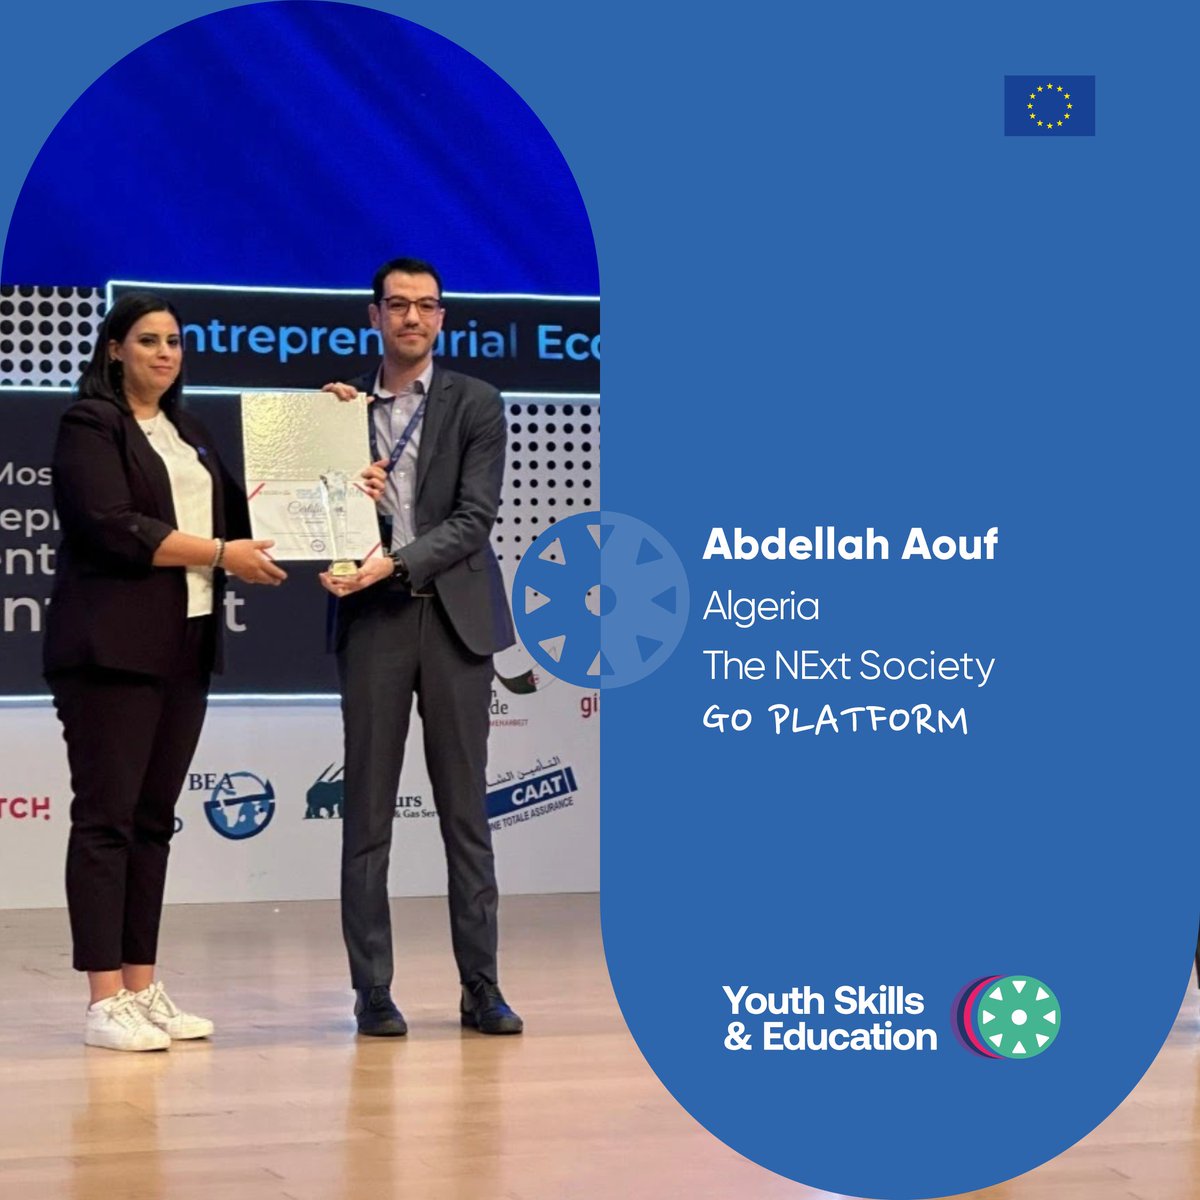 Meet Abdellah Aouf, revolutionising recruitment in Algeria 🇩🇿! With support from @TheNext_Society 🇪🇺, he established GO PLATFORM, a software company that helps bridge the gap between recruiters and local talents. @eu_near #EuropeanYearOfSkills #EU4Youth 👉 south.euneighbours.eu/ecard/entrepre…